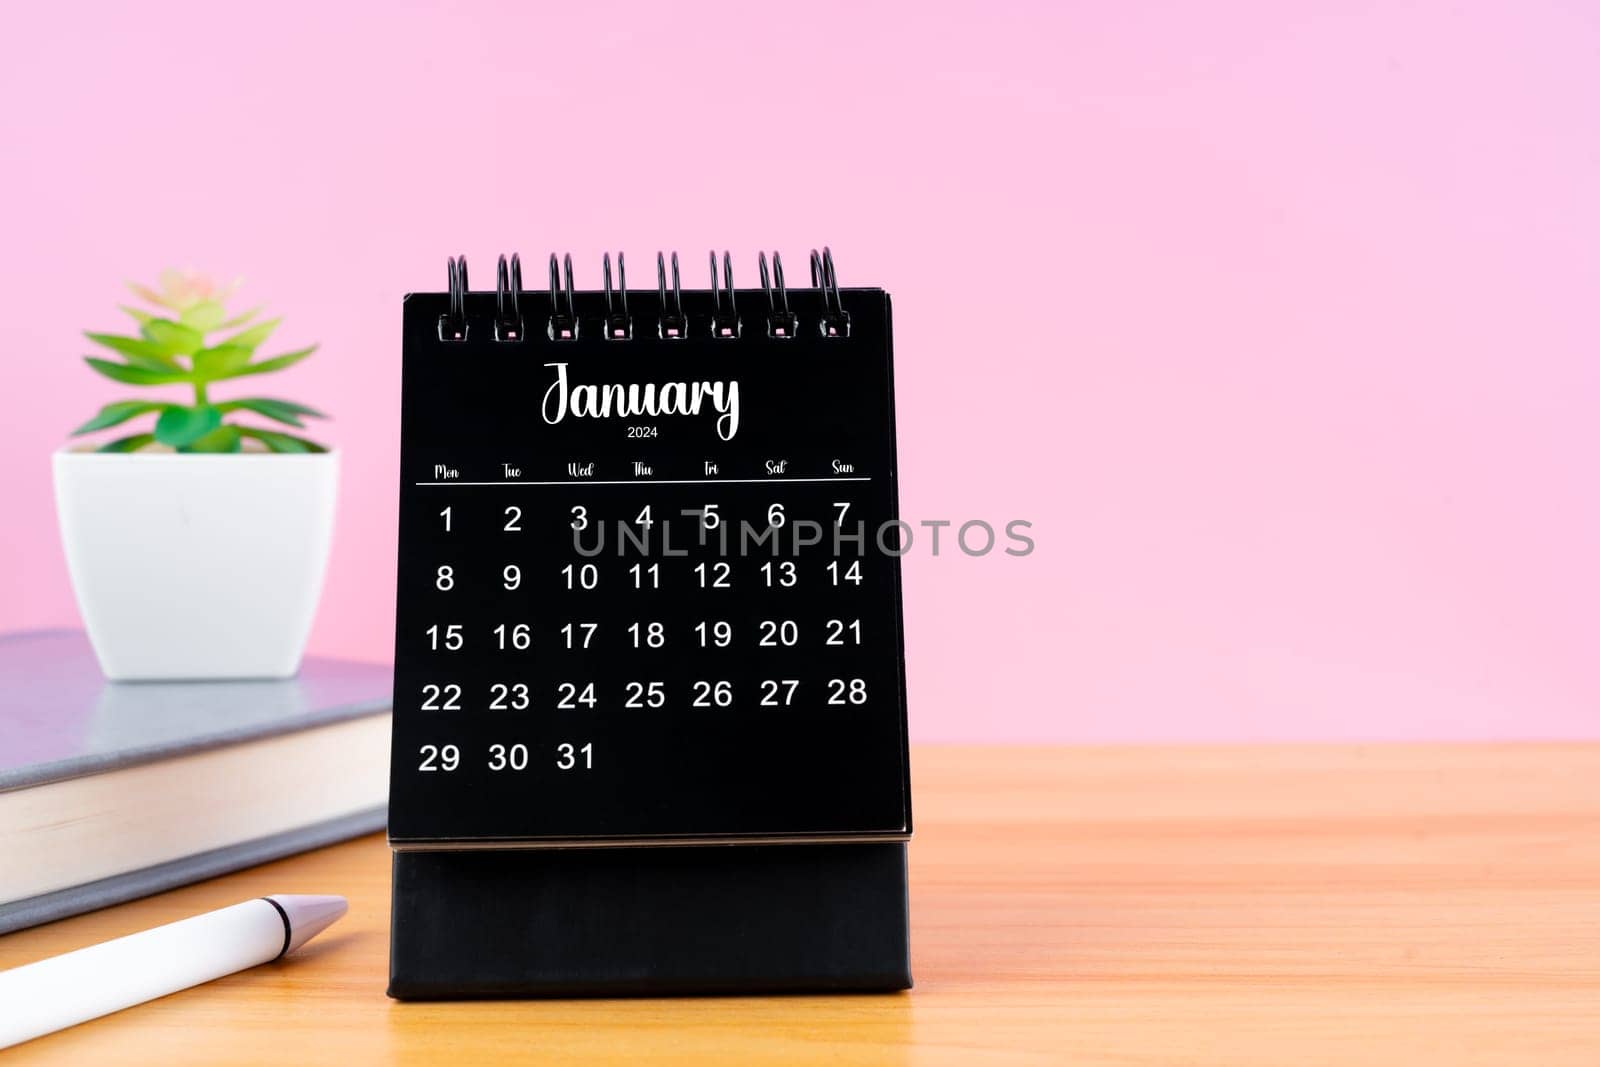 January Mini desk calendar for 2024 year on worktable with pink color background.